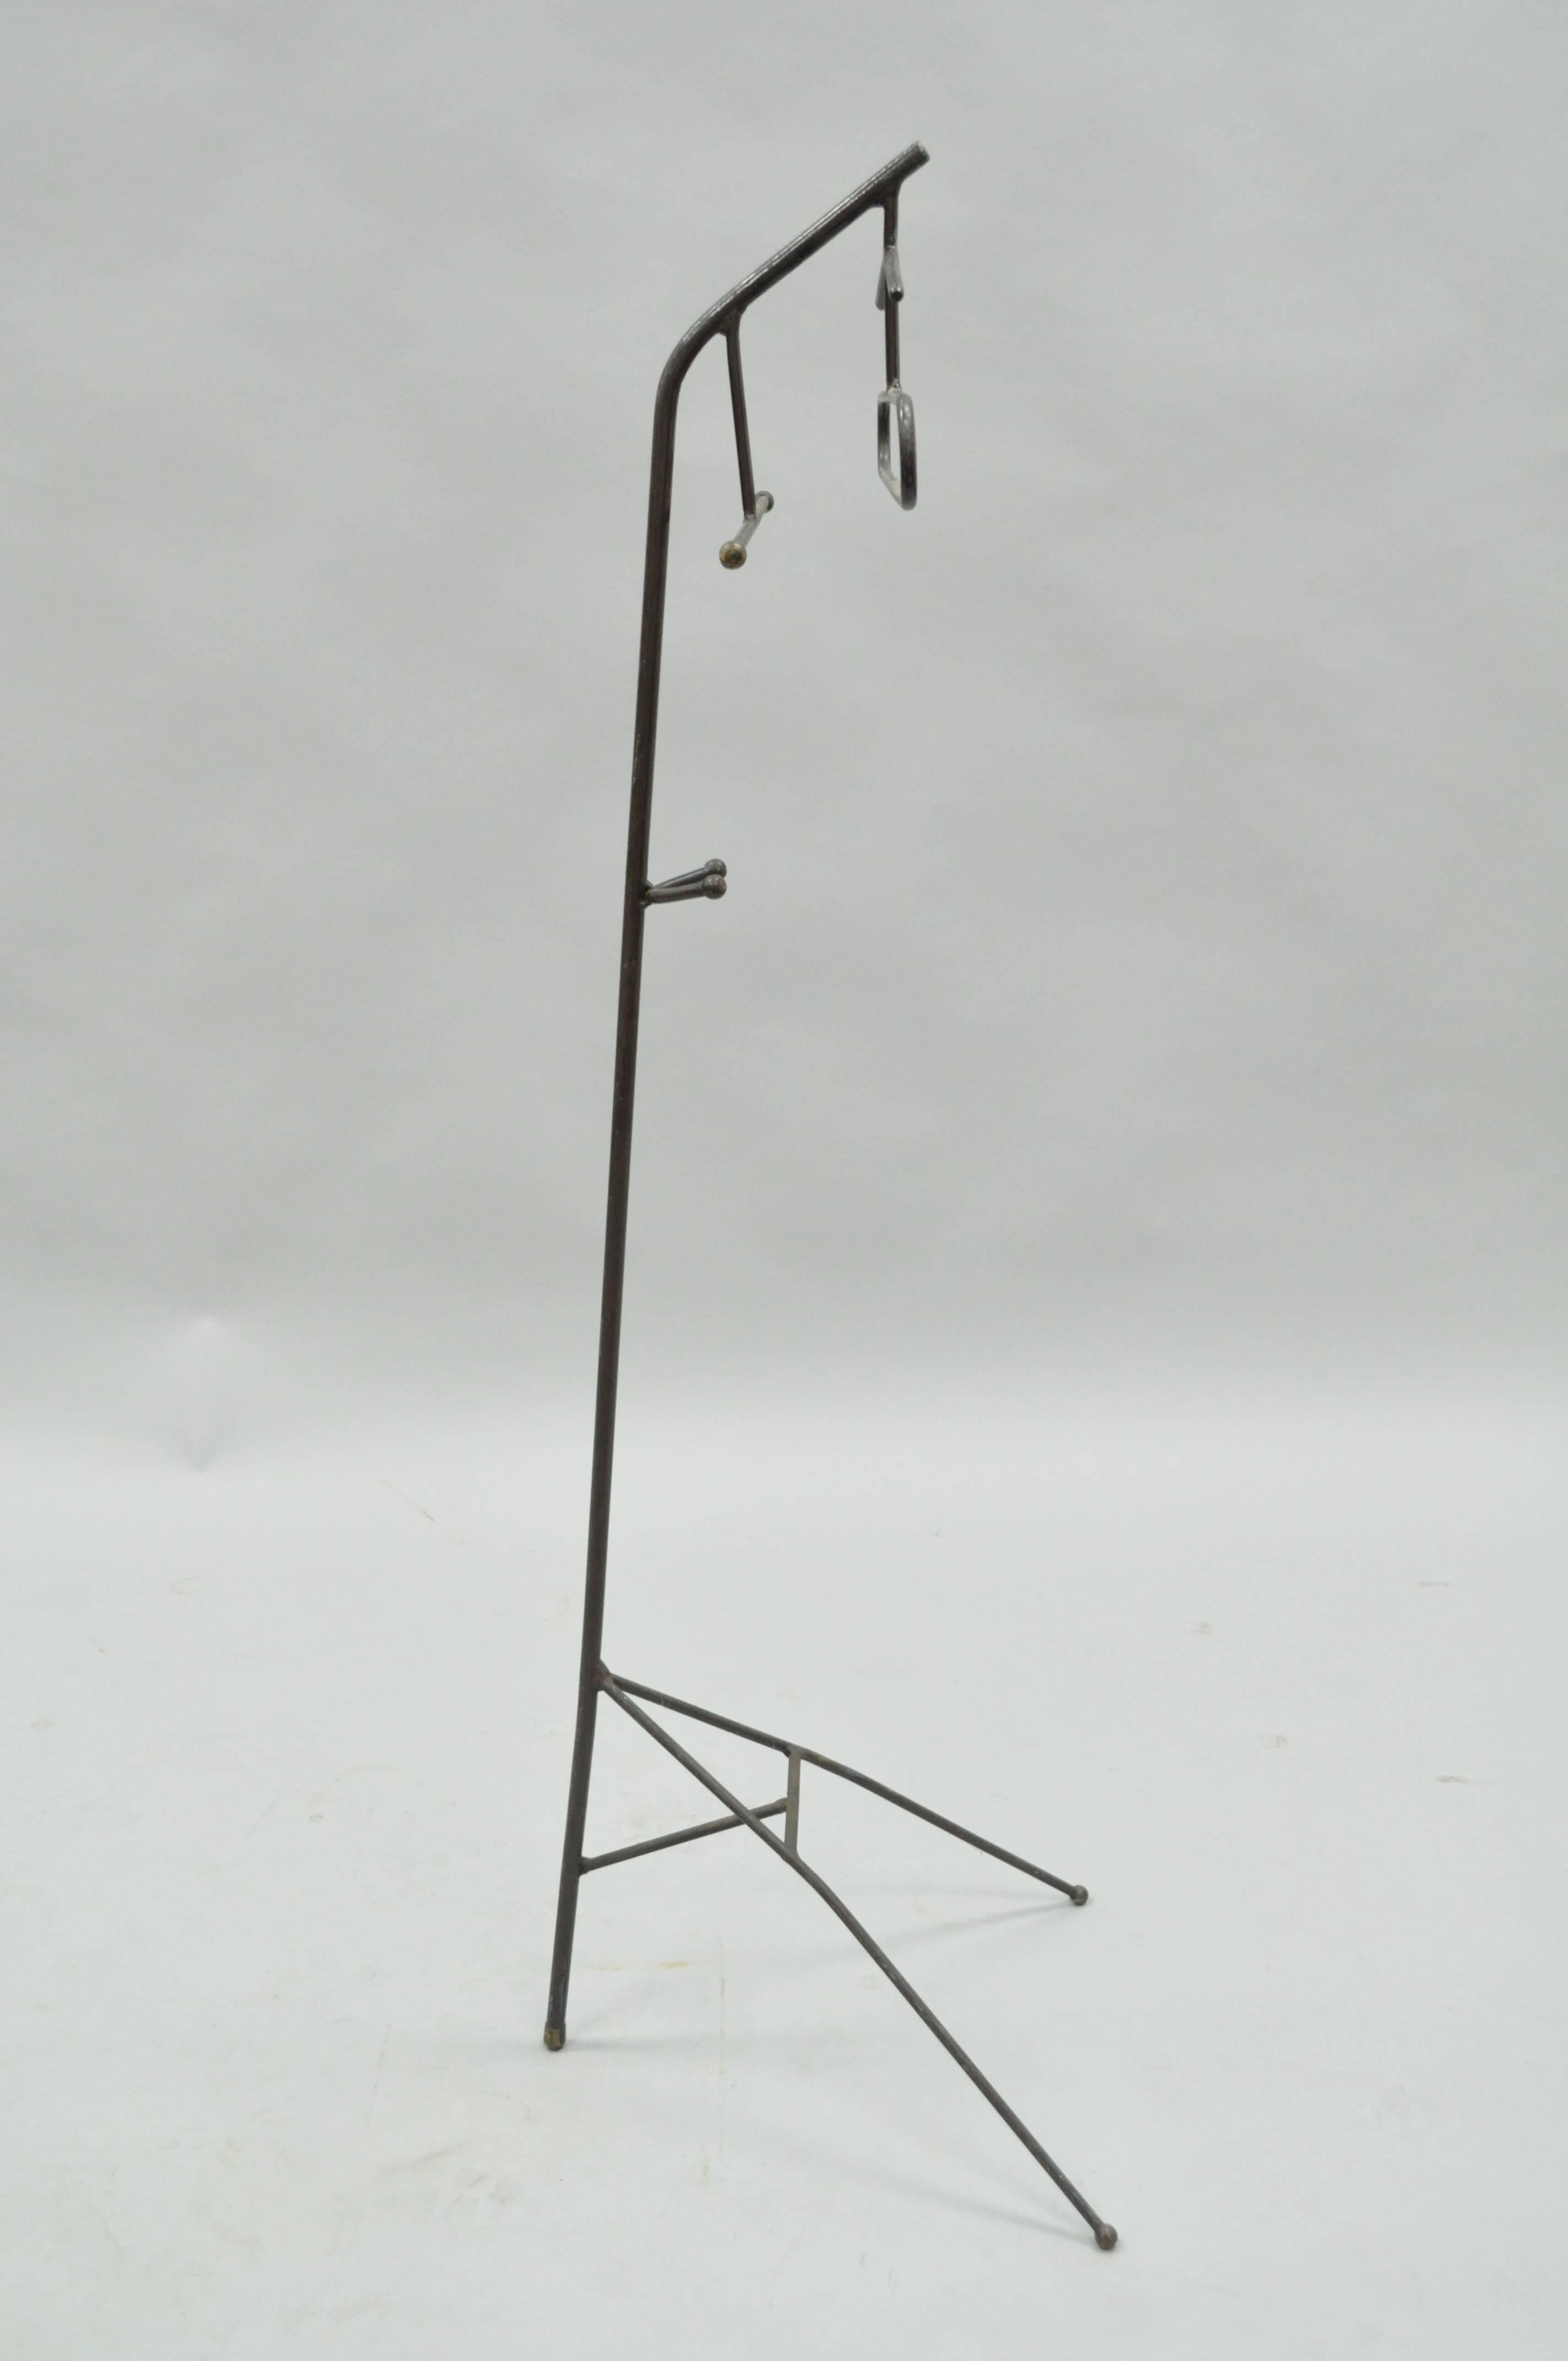 Unique vintage French Mid-Century Modern wrought iron and brass hairpin clothing or clothes valet in the manner of Jacques Adnet. Item features brass ball ends on the iron rods, clean modernist lines and great form. Item is constructed primarily of